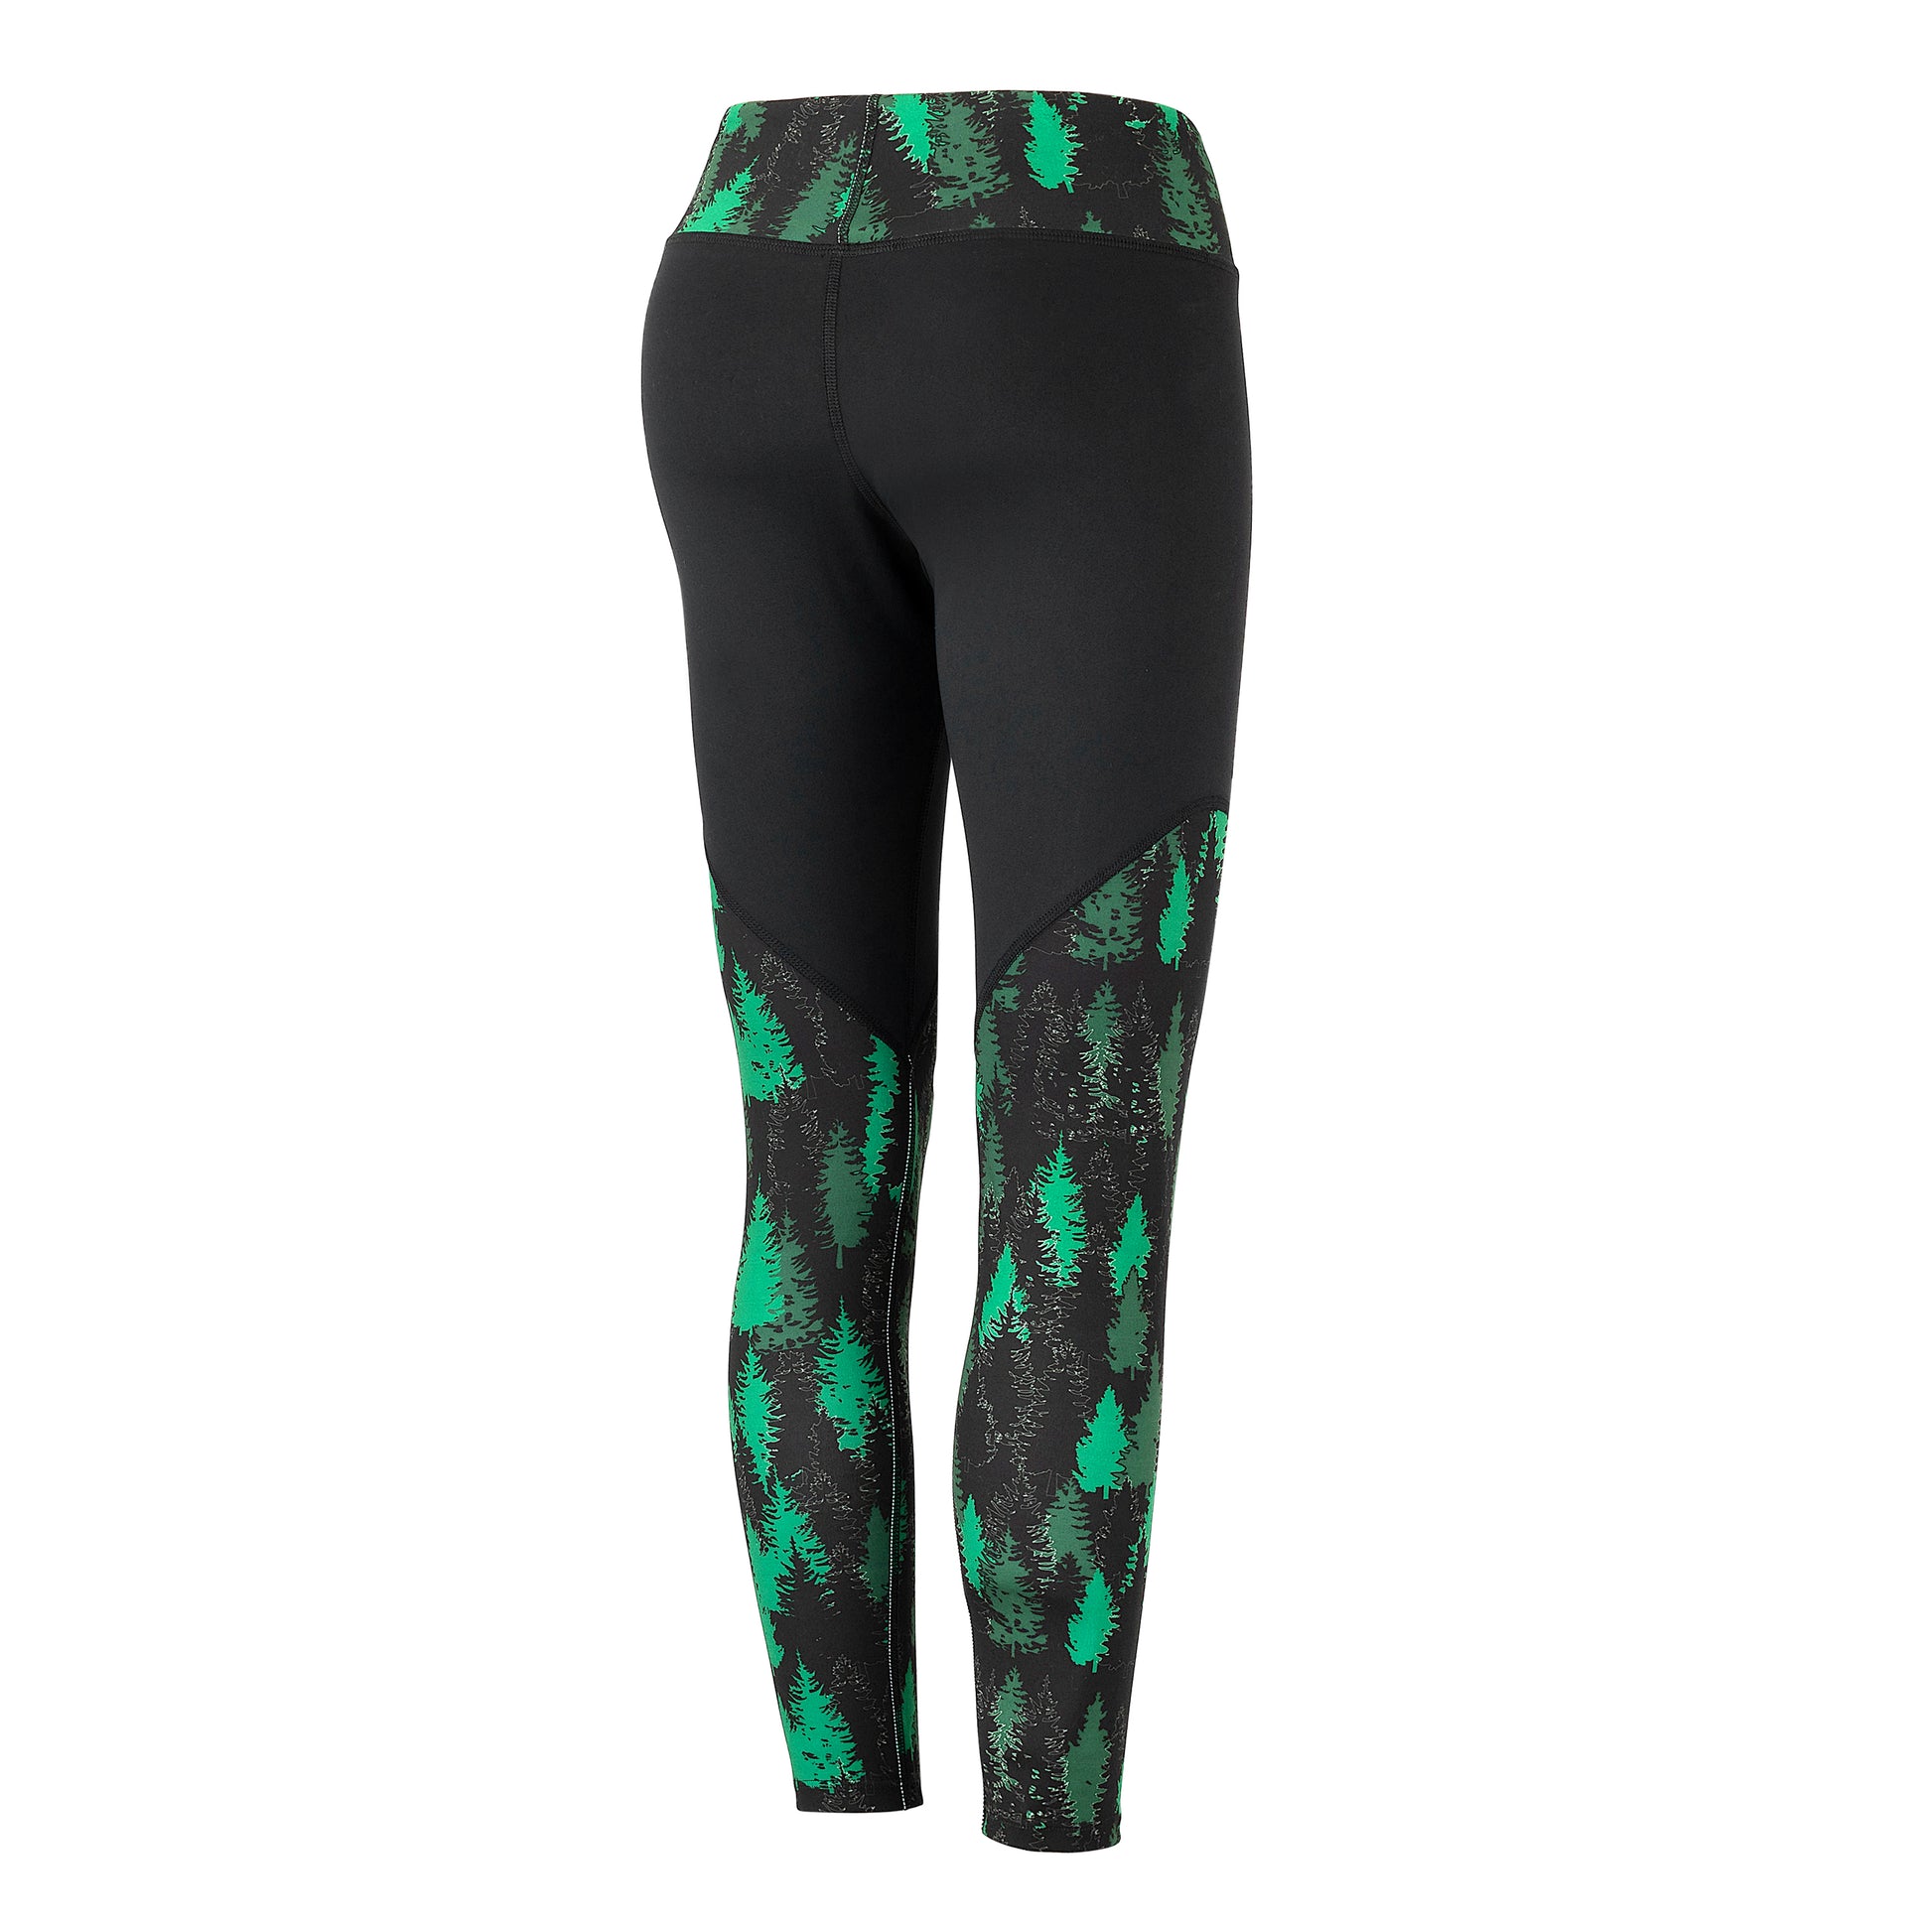 Made in USA 7/8 Green and Black Aspen Leggings. Crafted with care from a premium blend of materials. With a mid to high-rise waist, they provide just the right amount of coverage and support. The 7/8 length design adds a trendy touch to your look. These leggings feature a green and black scheme graphic pine tree pattern. Back View.